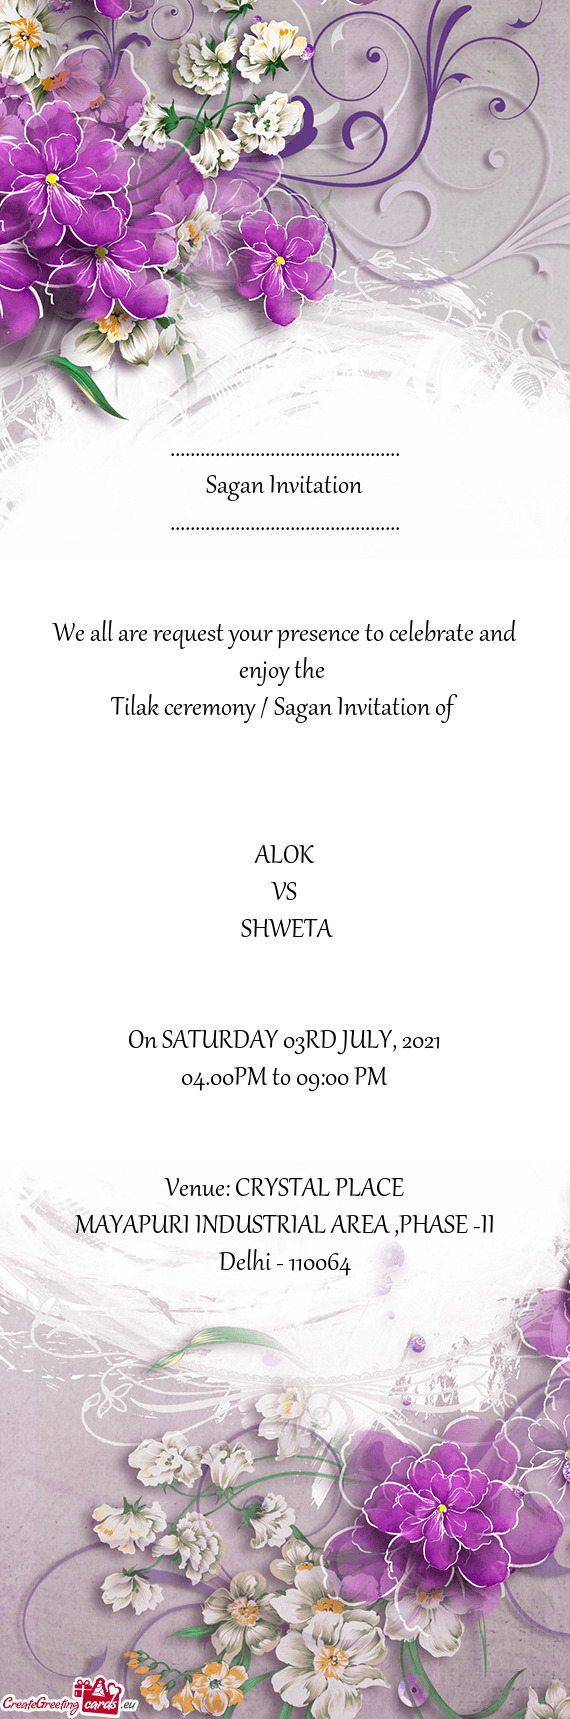 We all are request your presence to celebrate and enjoy the